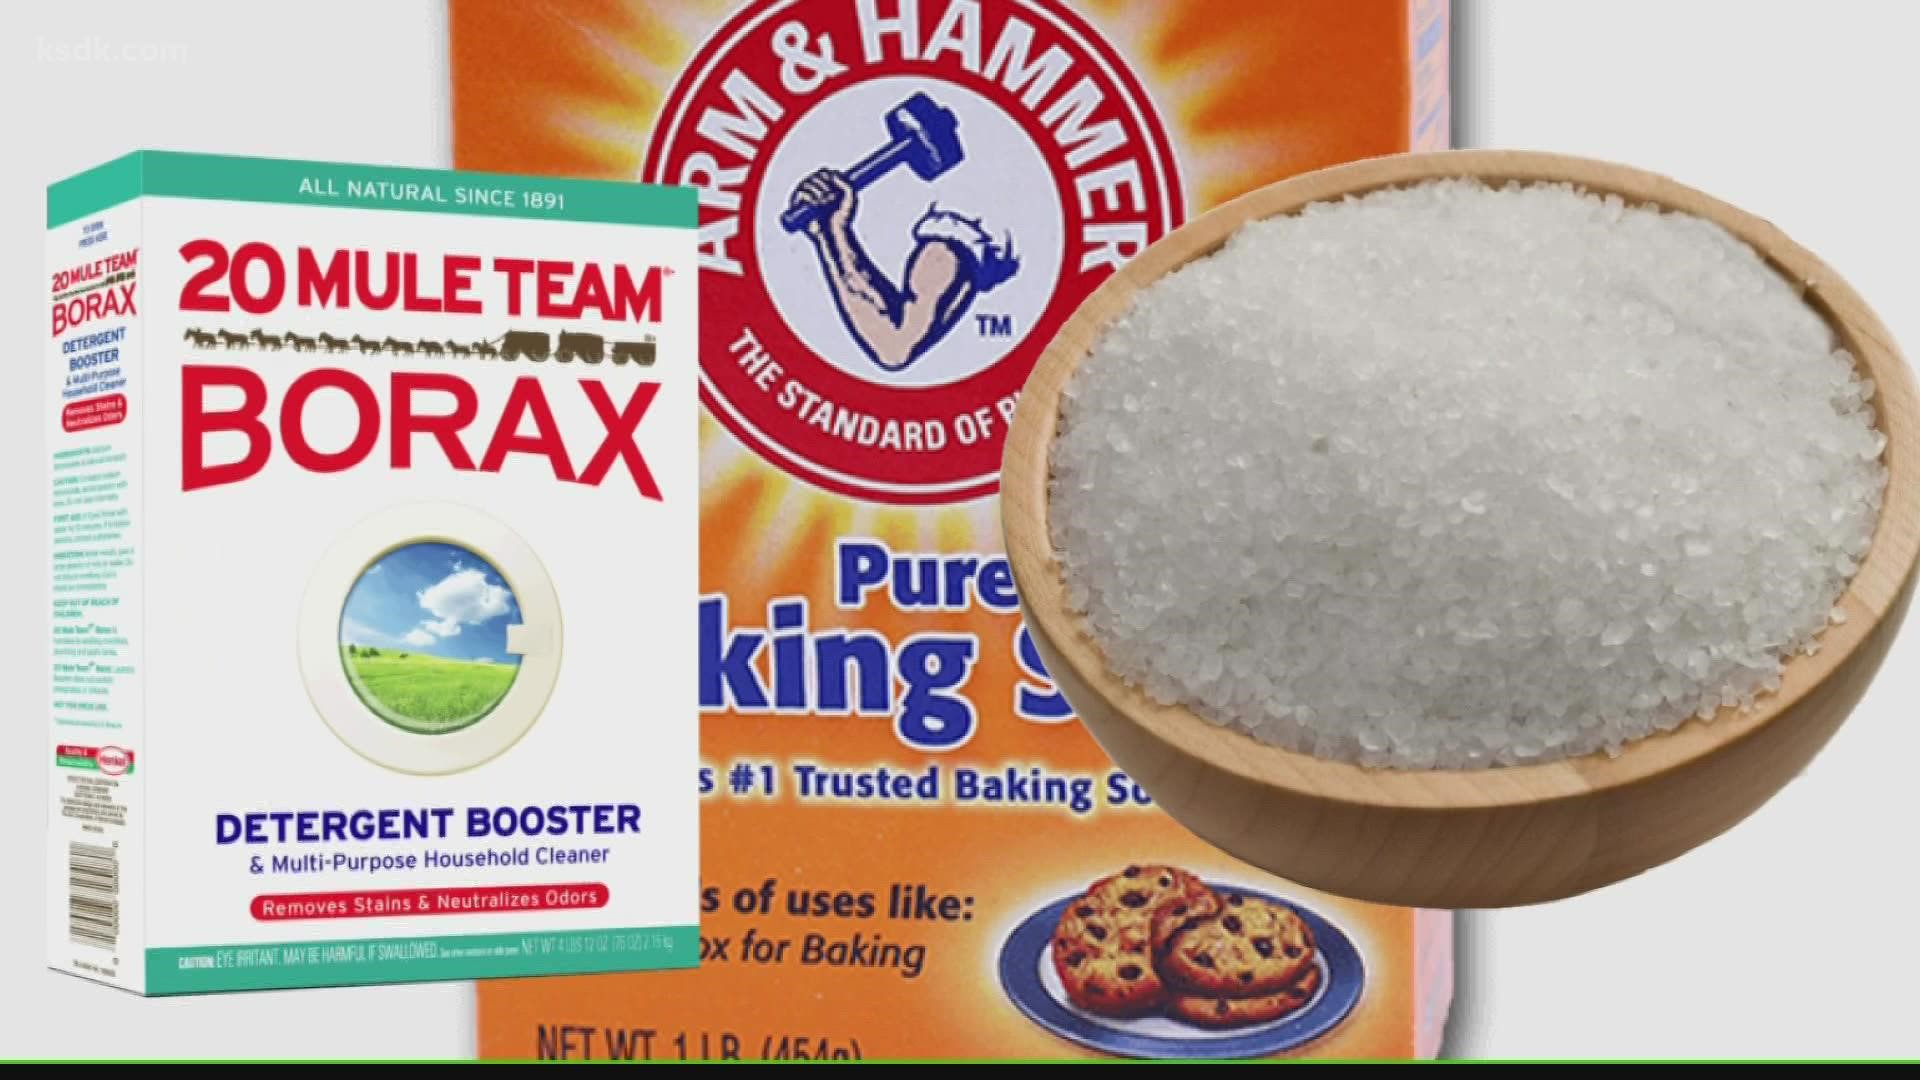 Dr. Farzana Hoque says she was asked Tuesday morning about a new Internet trend: using Borax laundry detergent to remove a COVID vaccine after immunization.